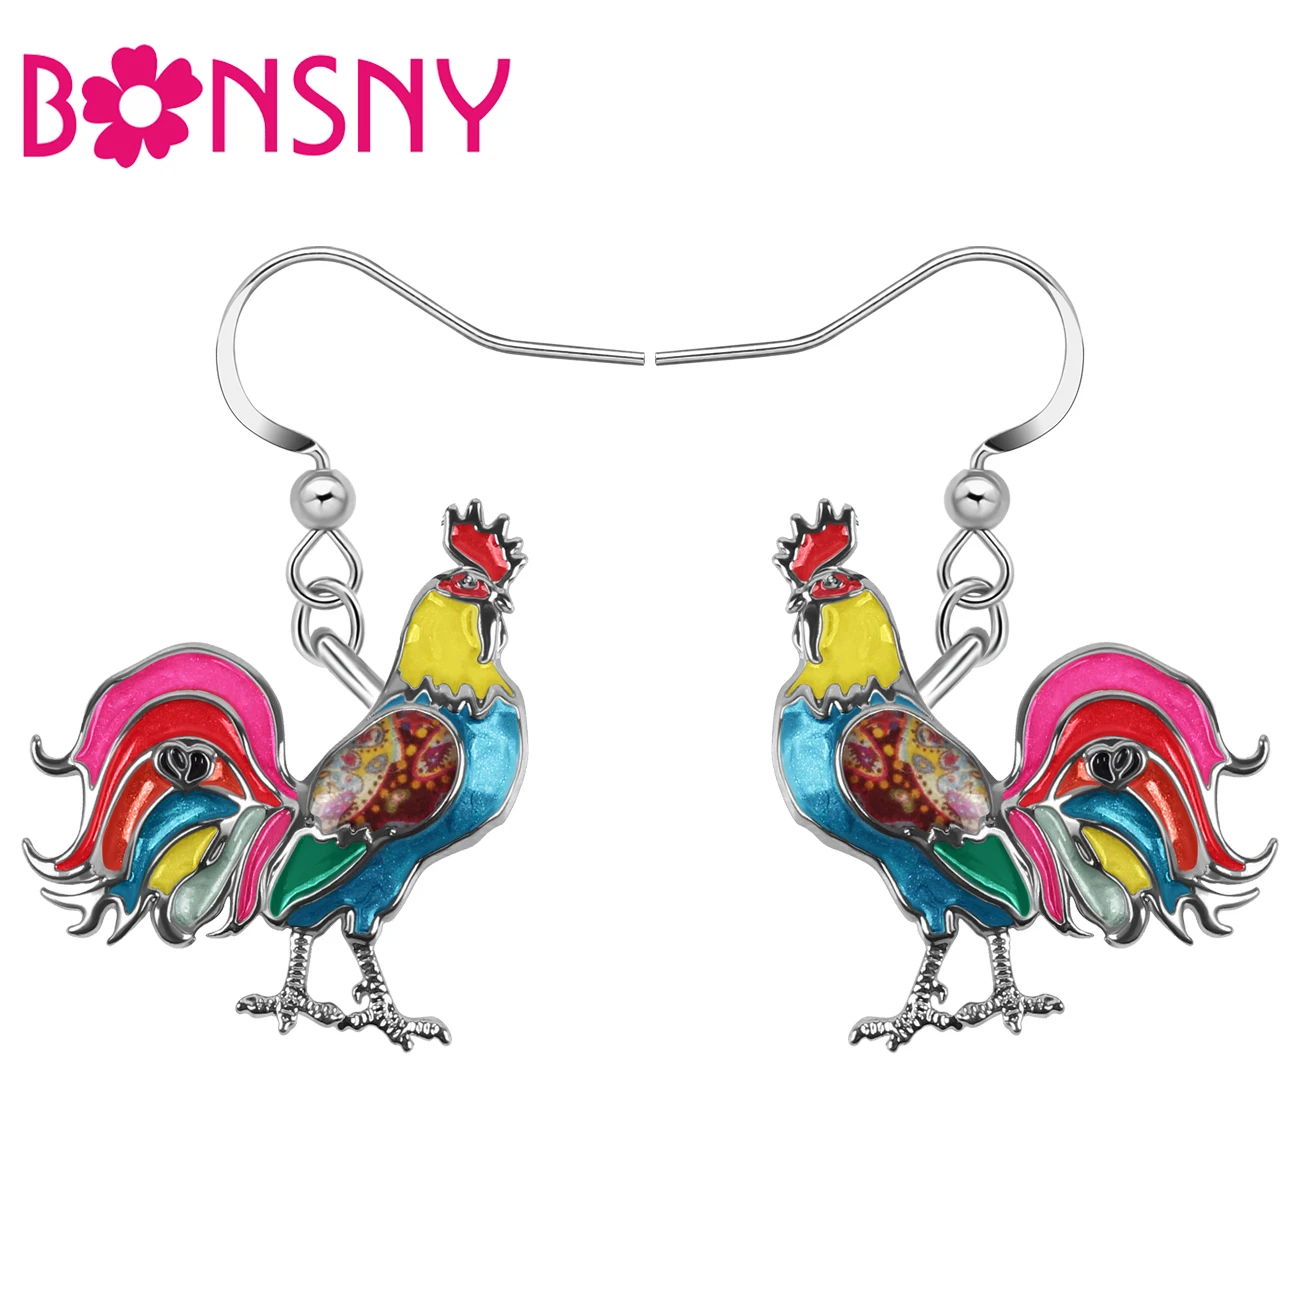 

Bonsny Enamel Alloy Metal Floral Cute Roosters Earrings Poultry Dangle Drop Charms Fashion Accessories For Women Girls Teen Gift